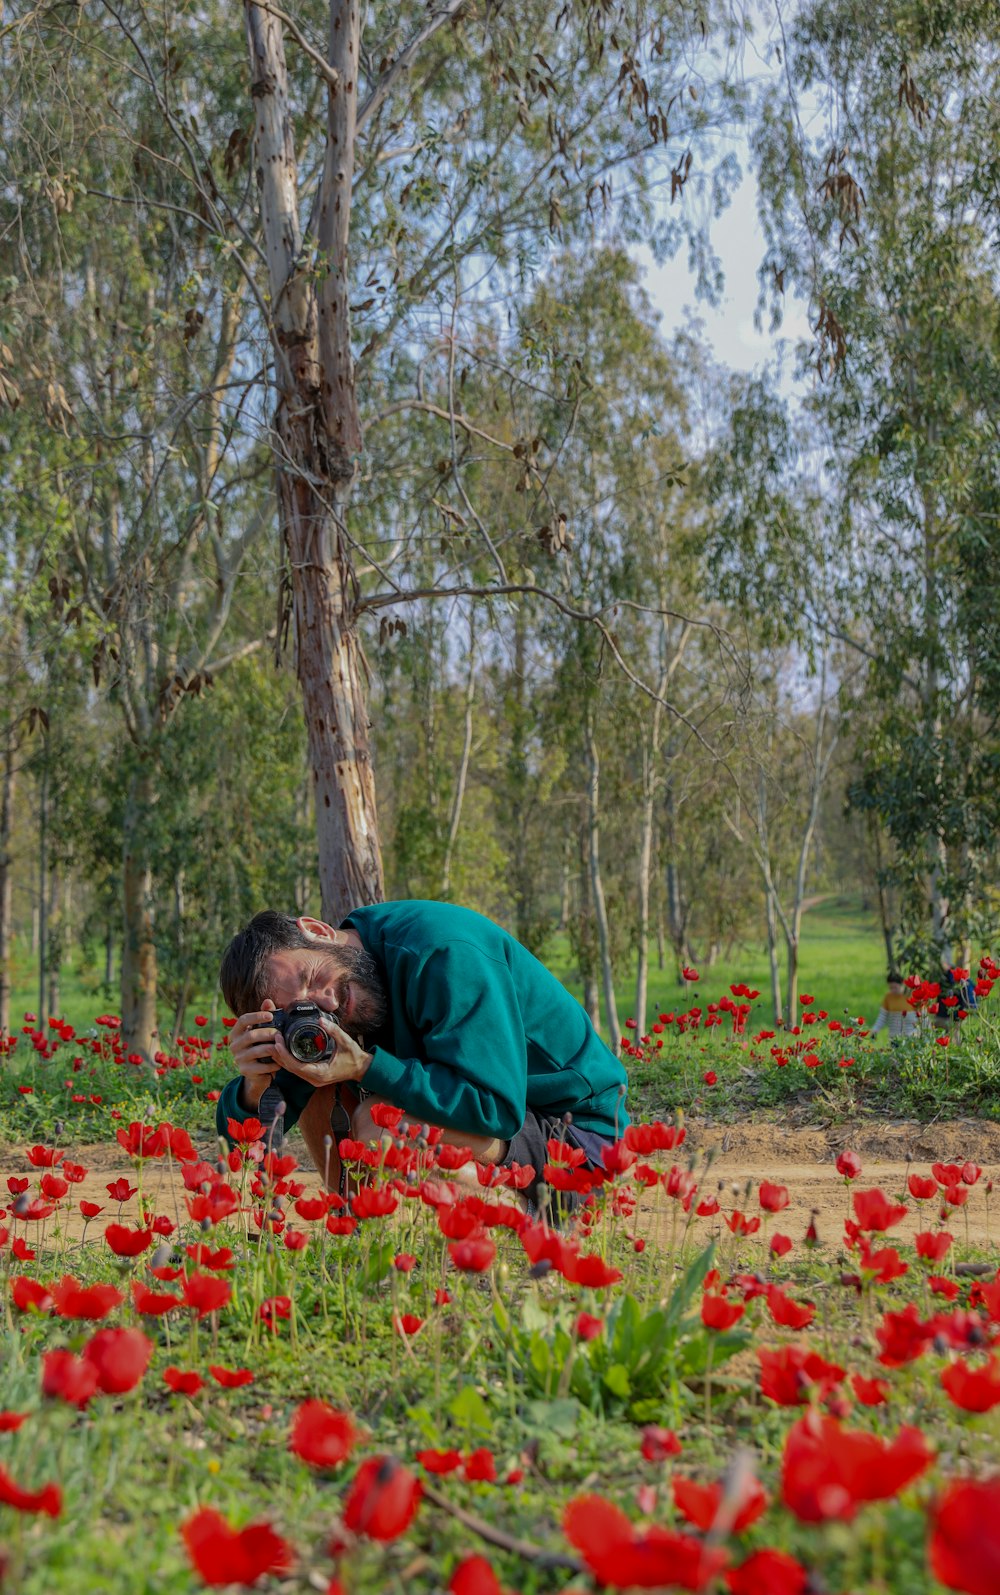 man in green hoodie and woman in blue jacket kissing on red flower field during daytime